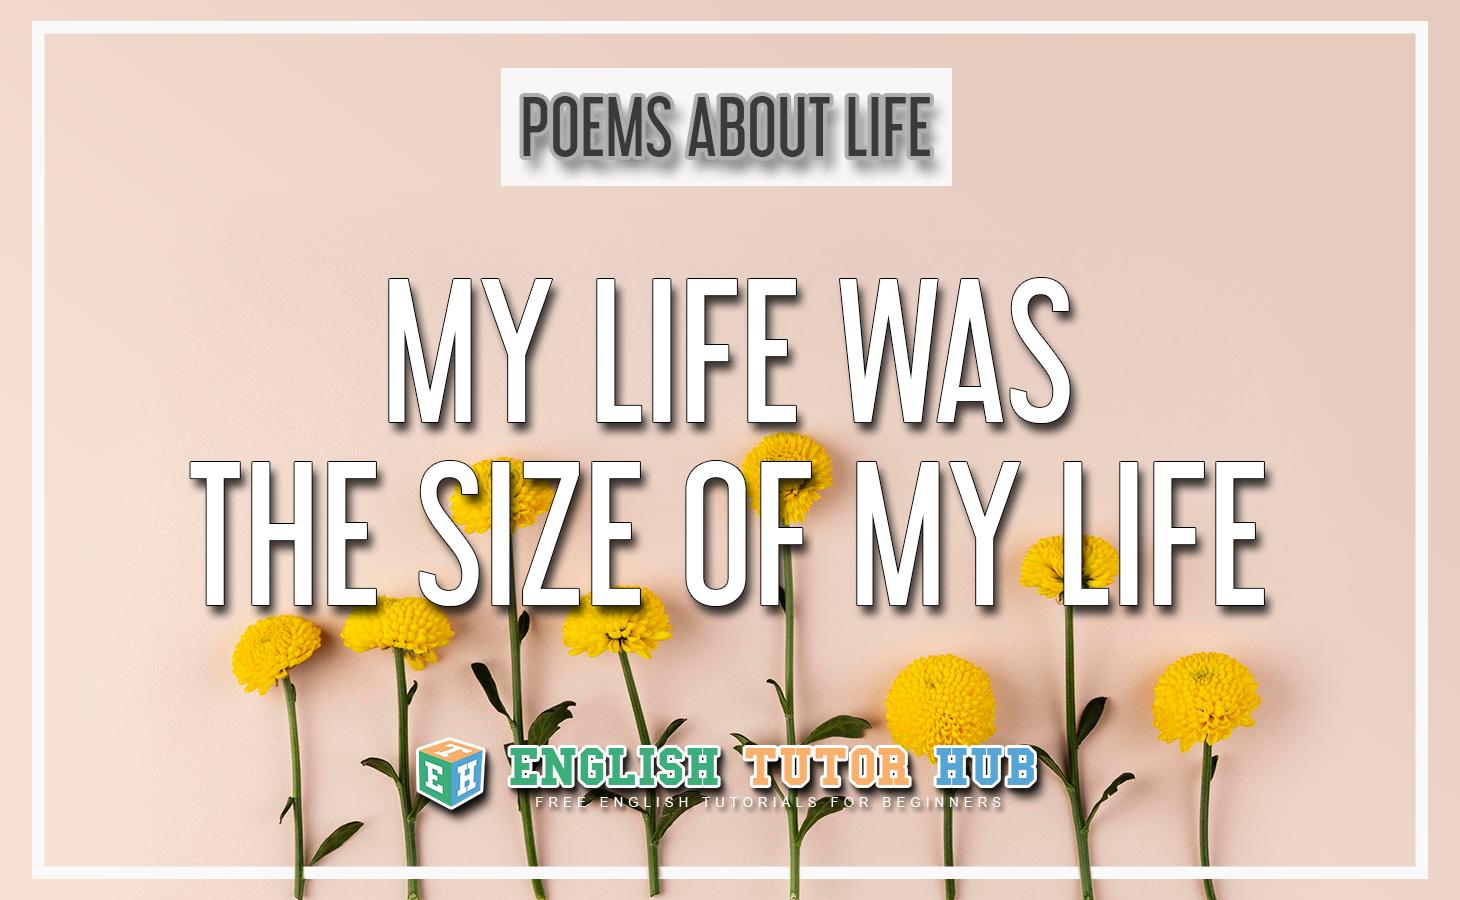 Poems About Life - My Life Was The Size Of My Life